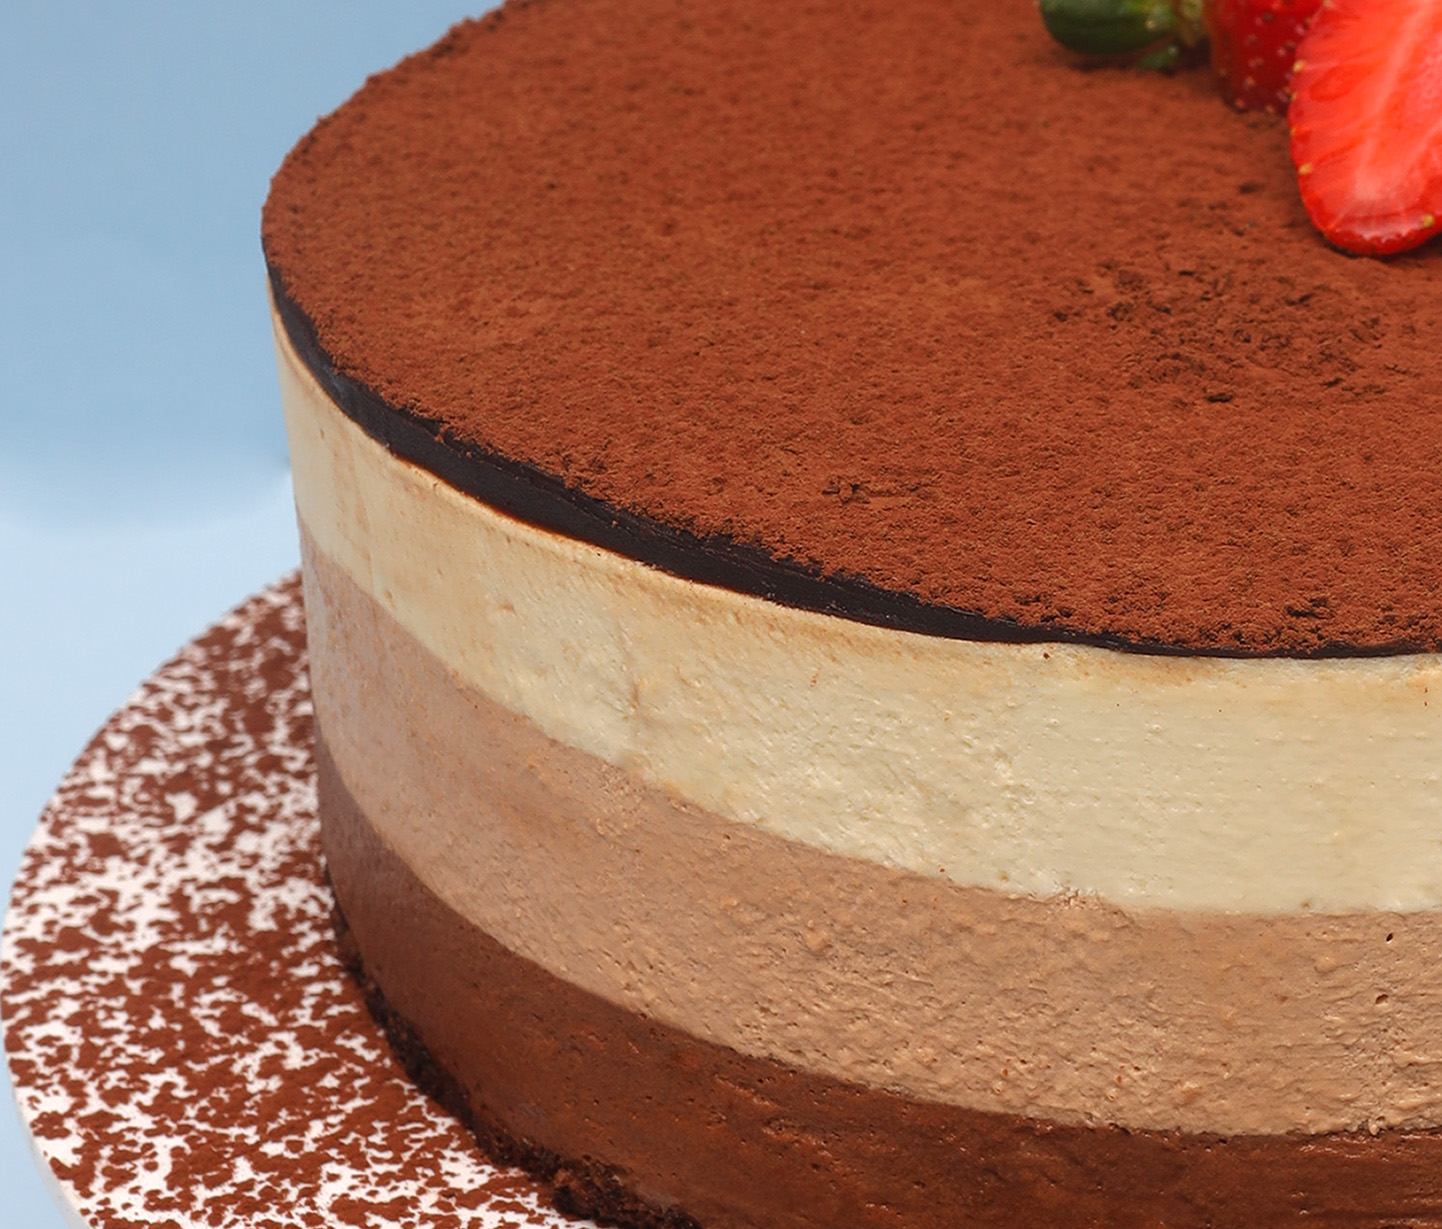 Uni Bread Fort Lee - Sliced Chocolate Mousse Cake